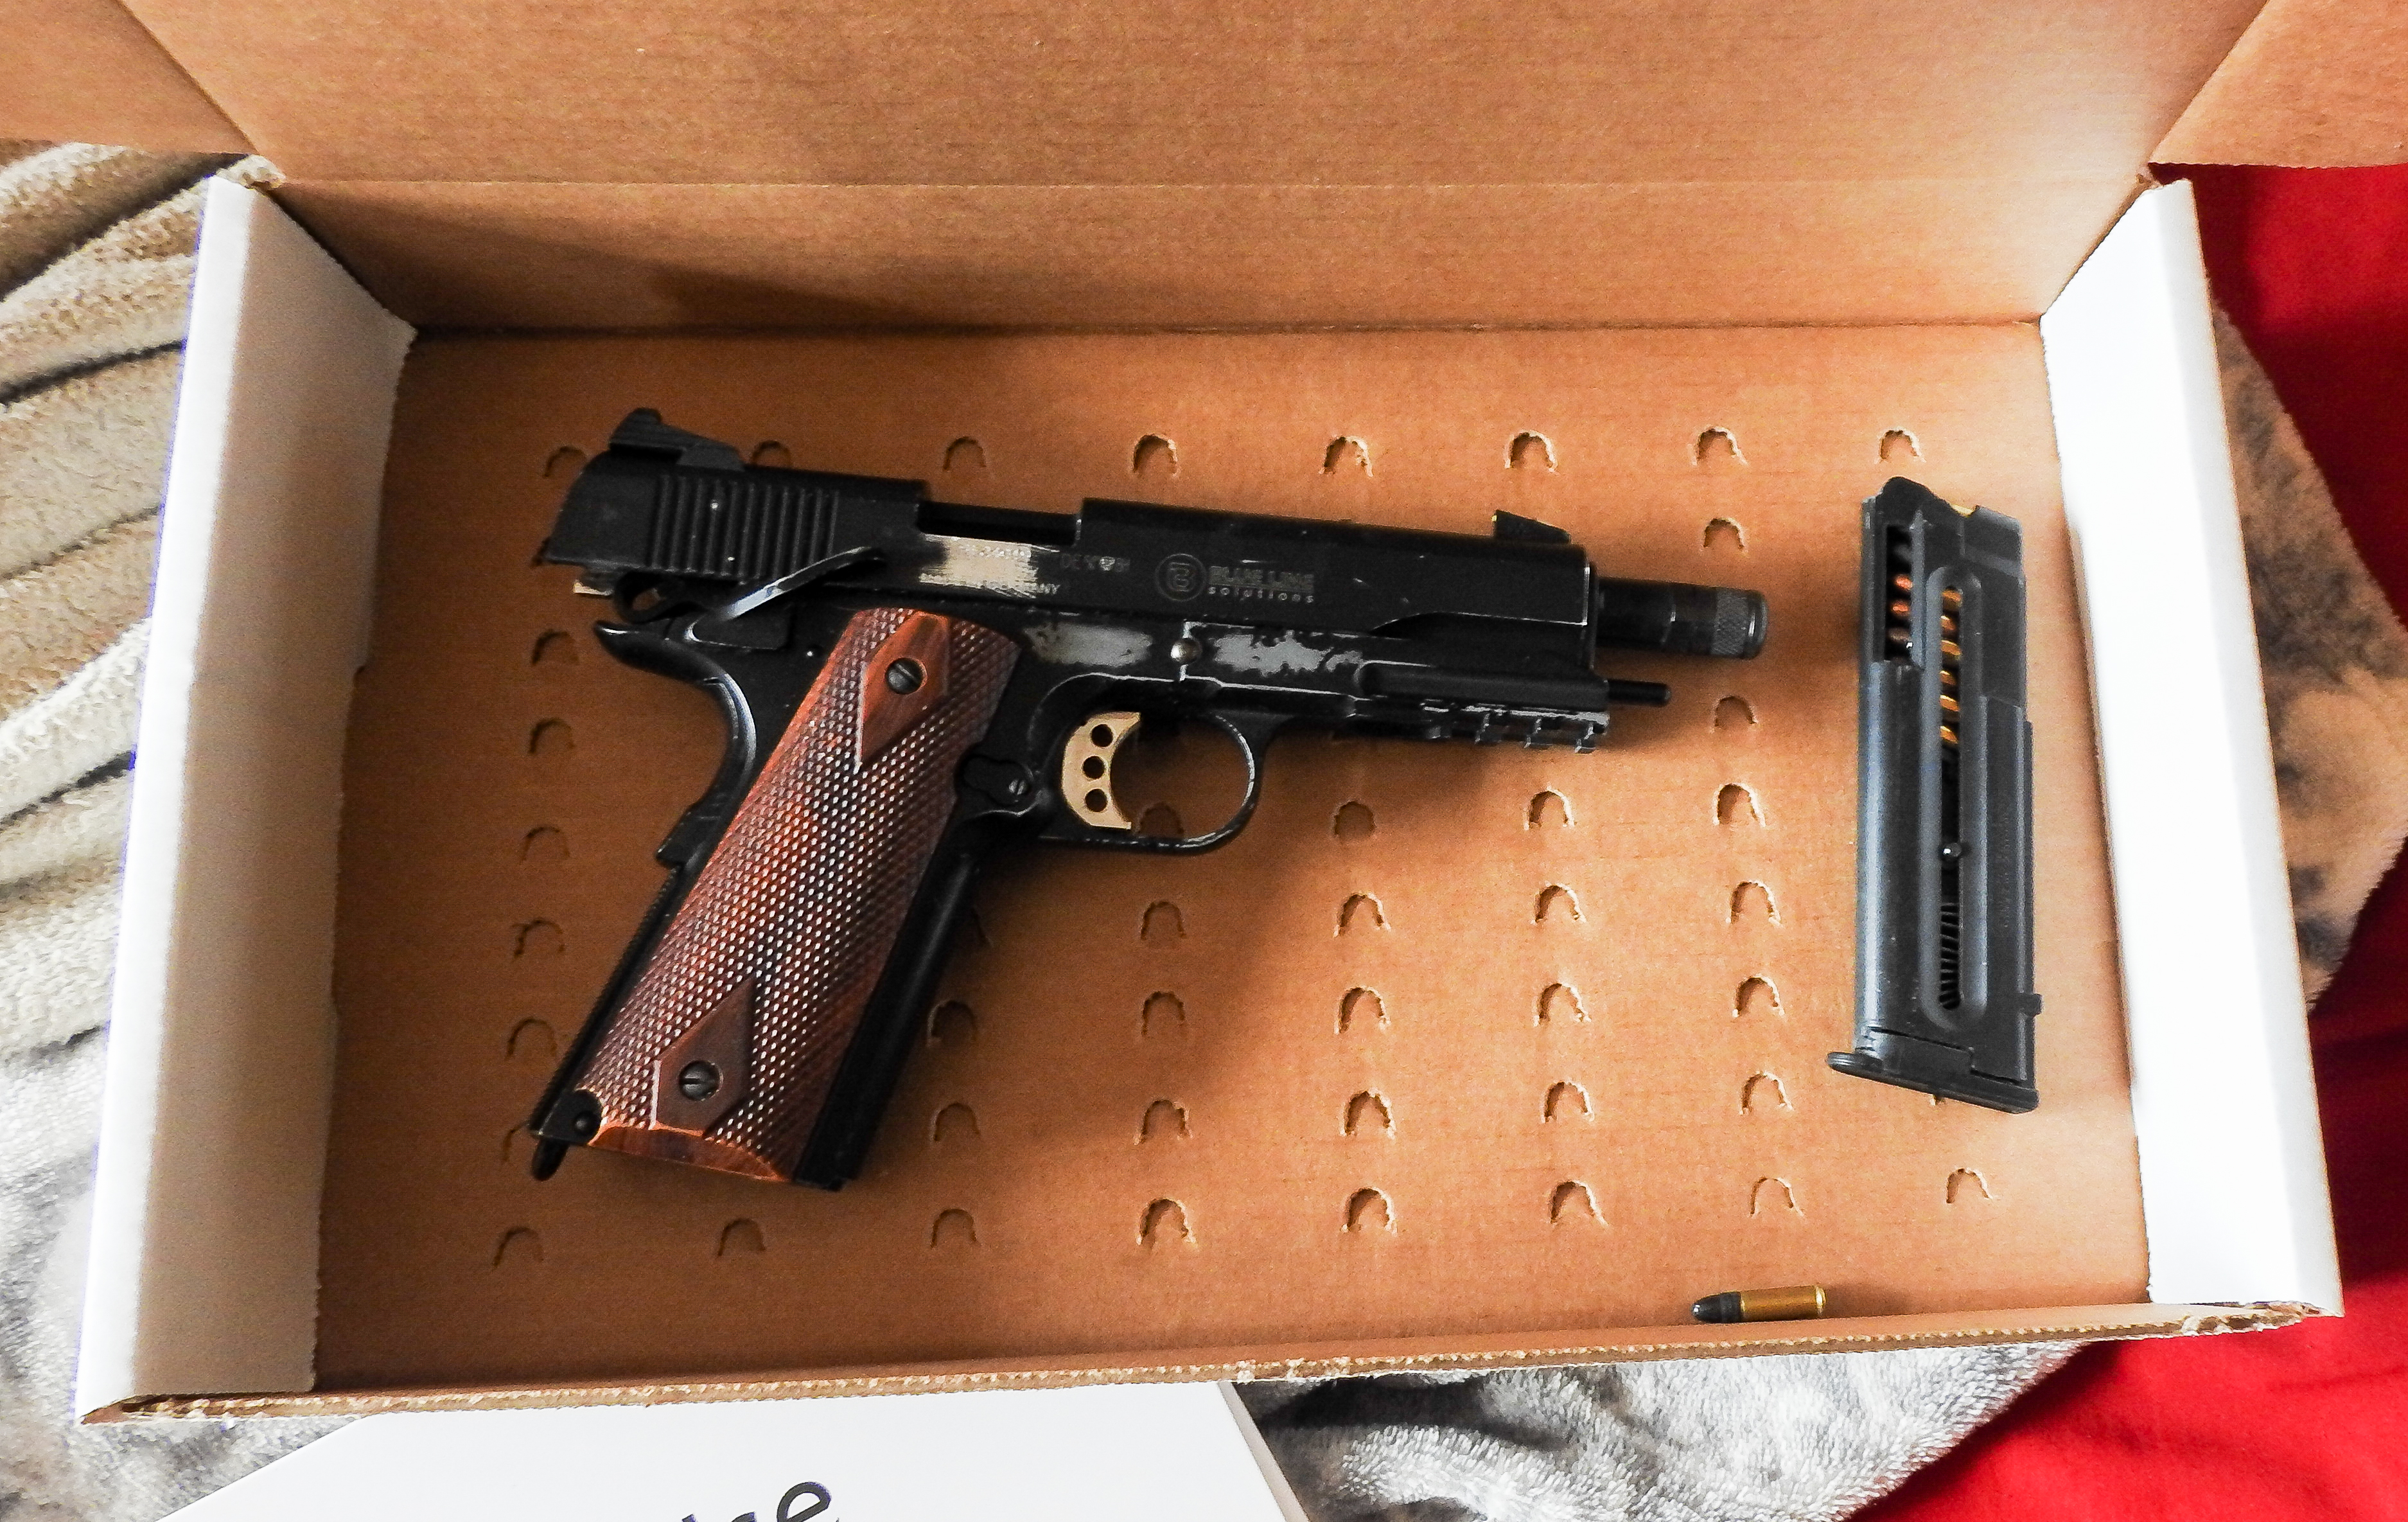 Three handguns, drugs and cash seized during search of apartment 